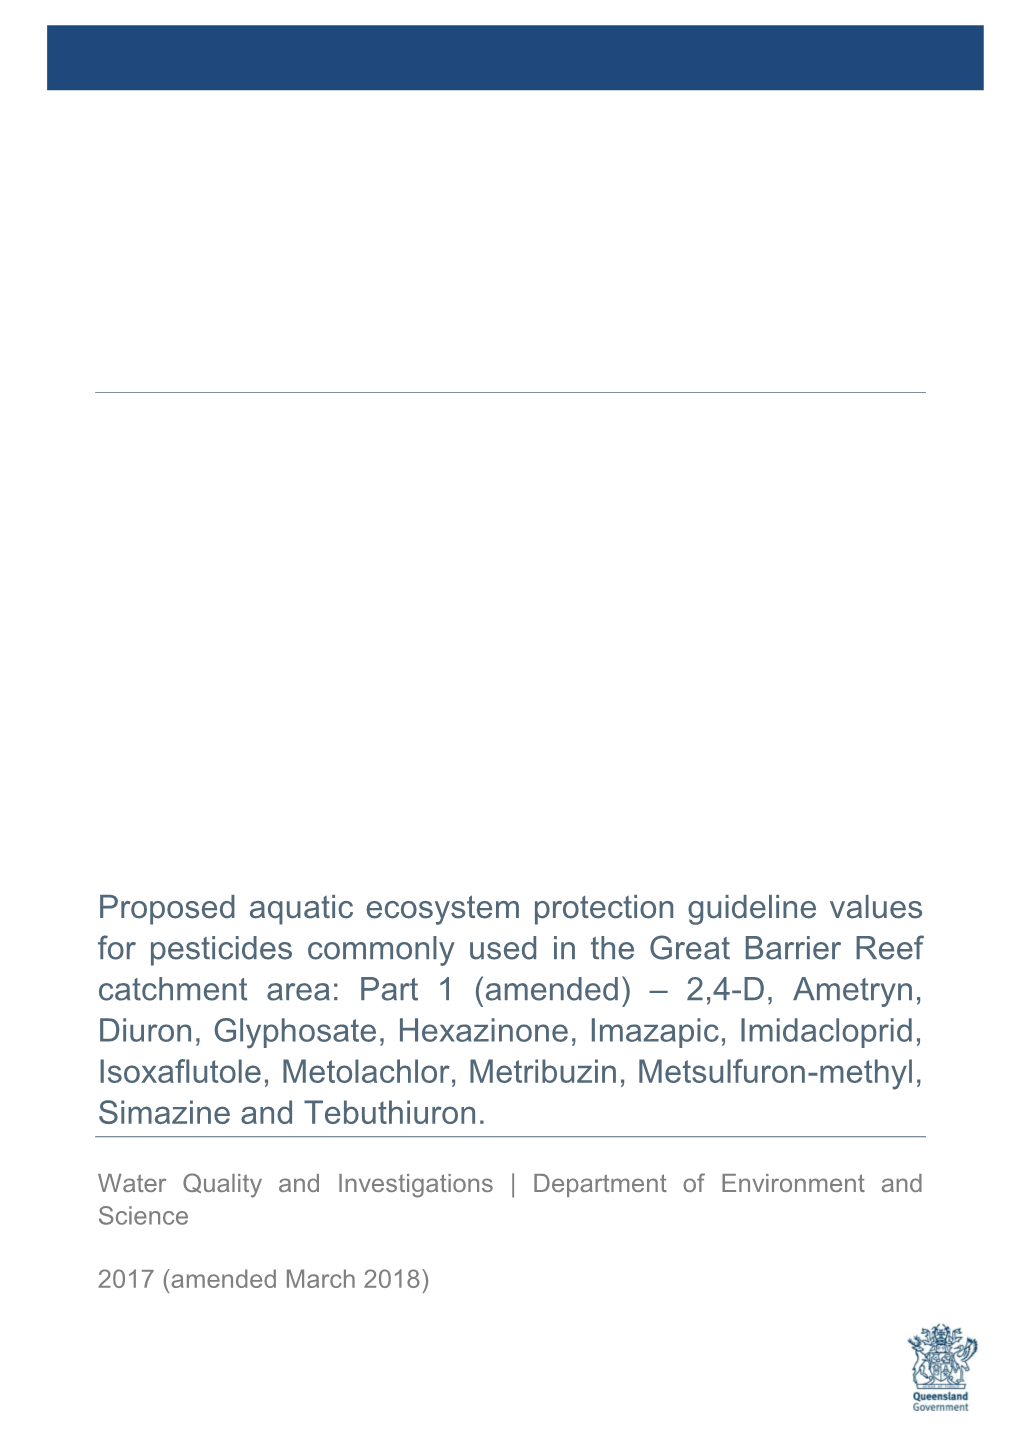 Proposed Aquatic Ecosystem Protection Guideline Values for Pesticides Commonly Used in the Great Barrier Reef Catchment Area